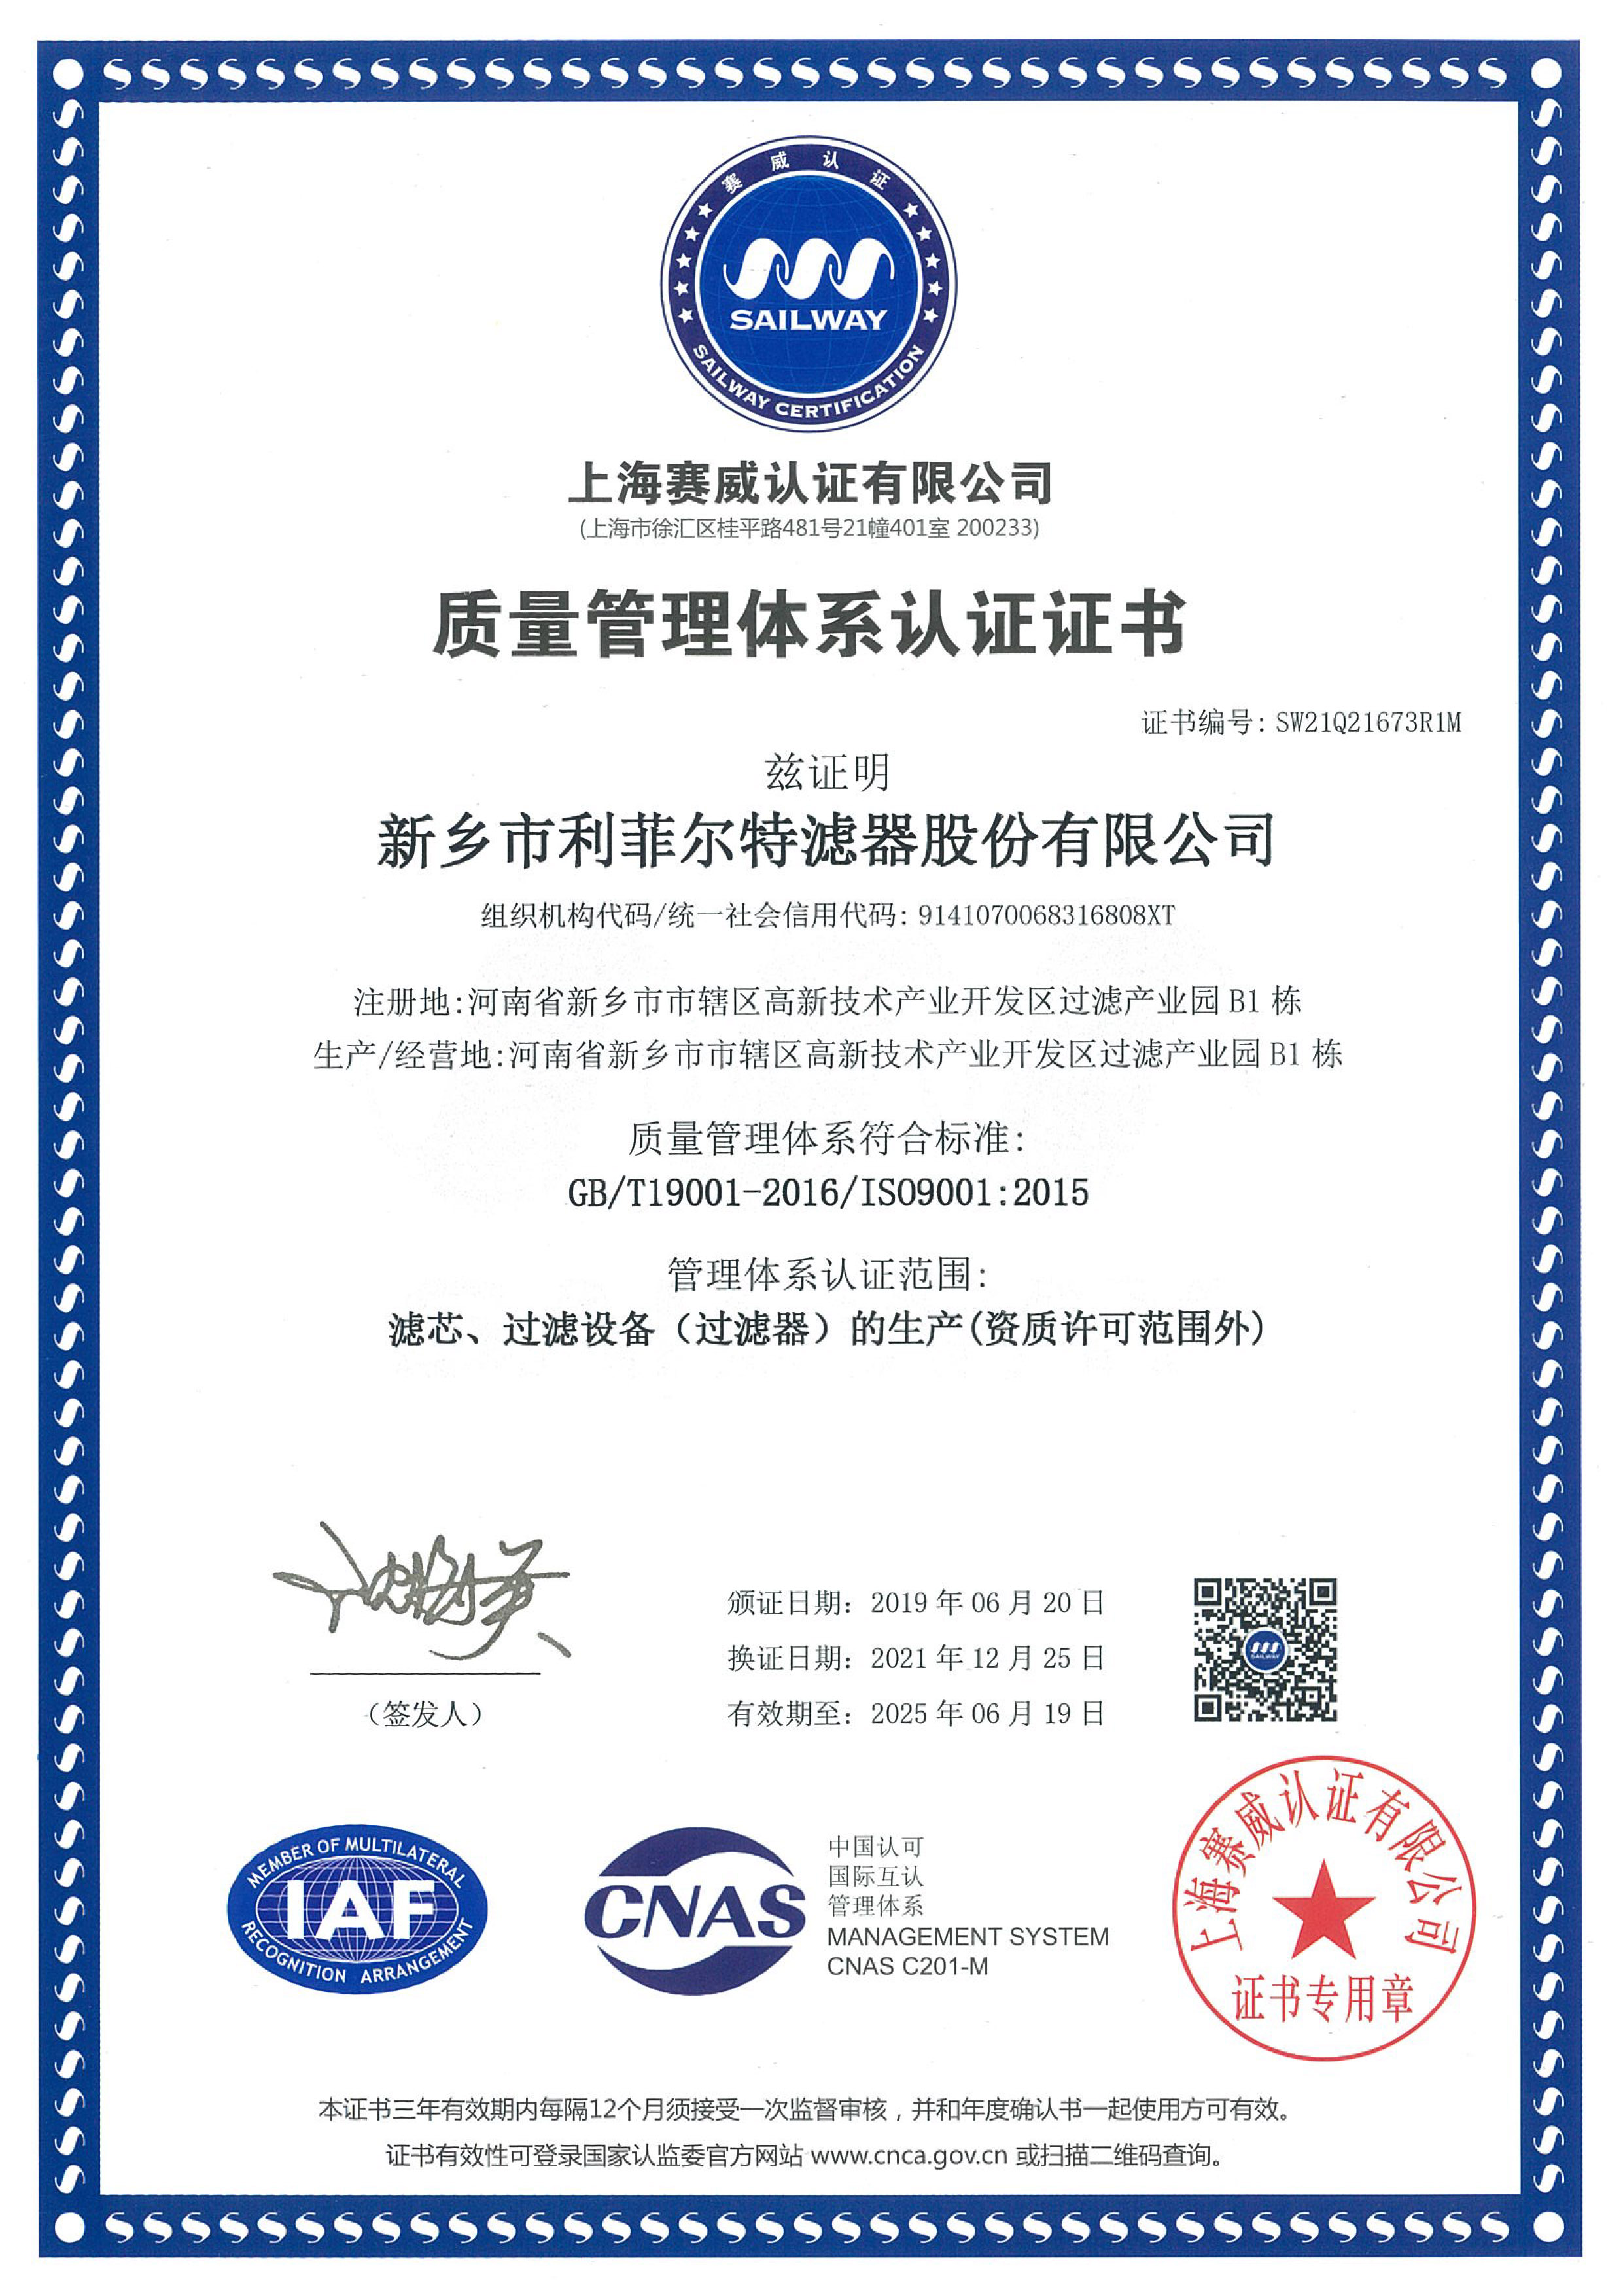 Honorary certificate: quality management system certificate